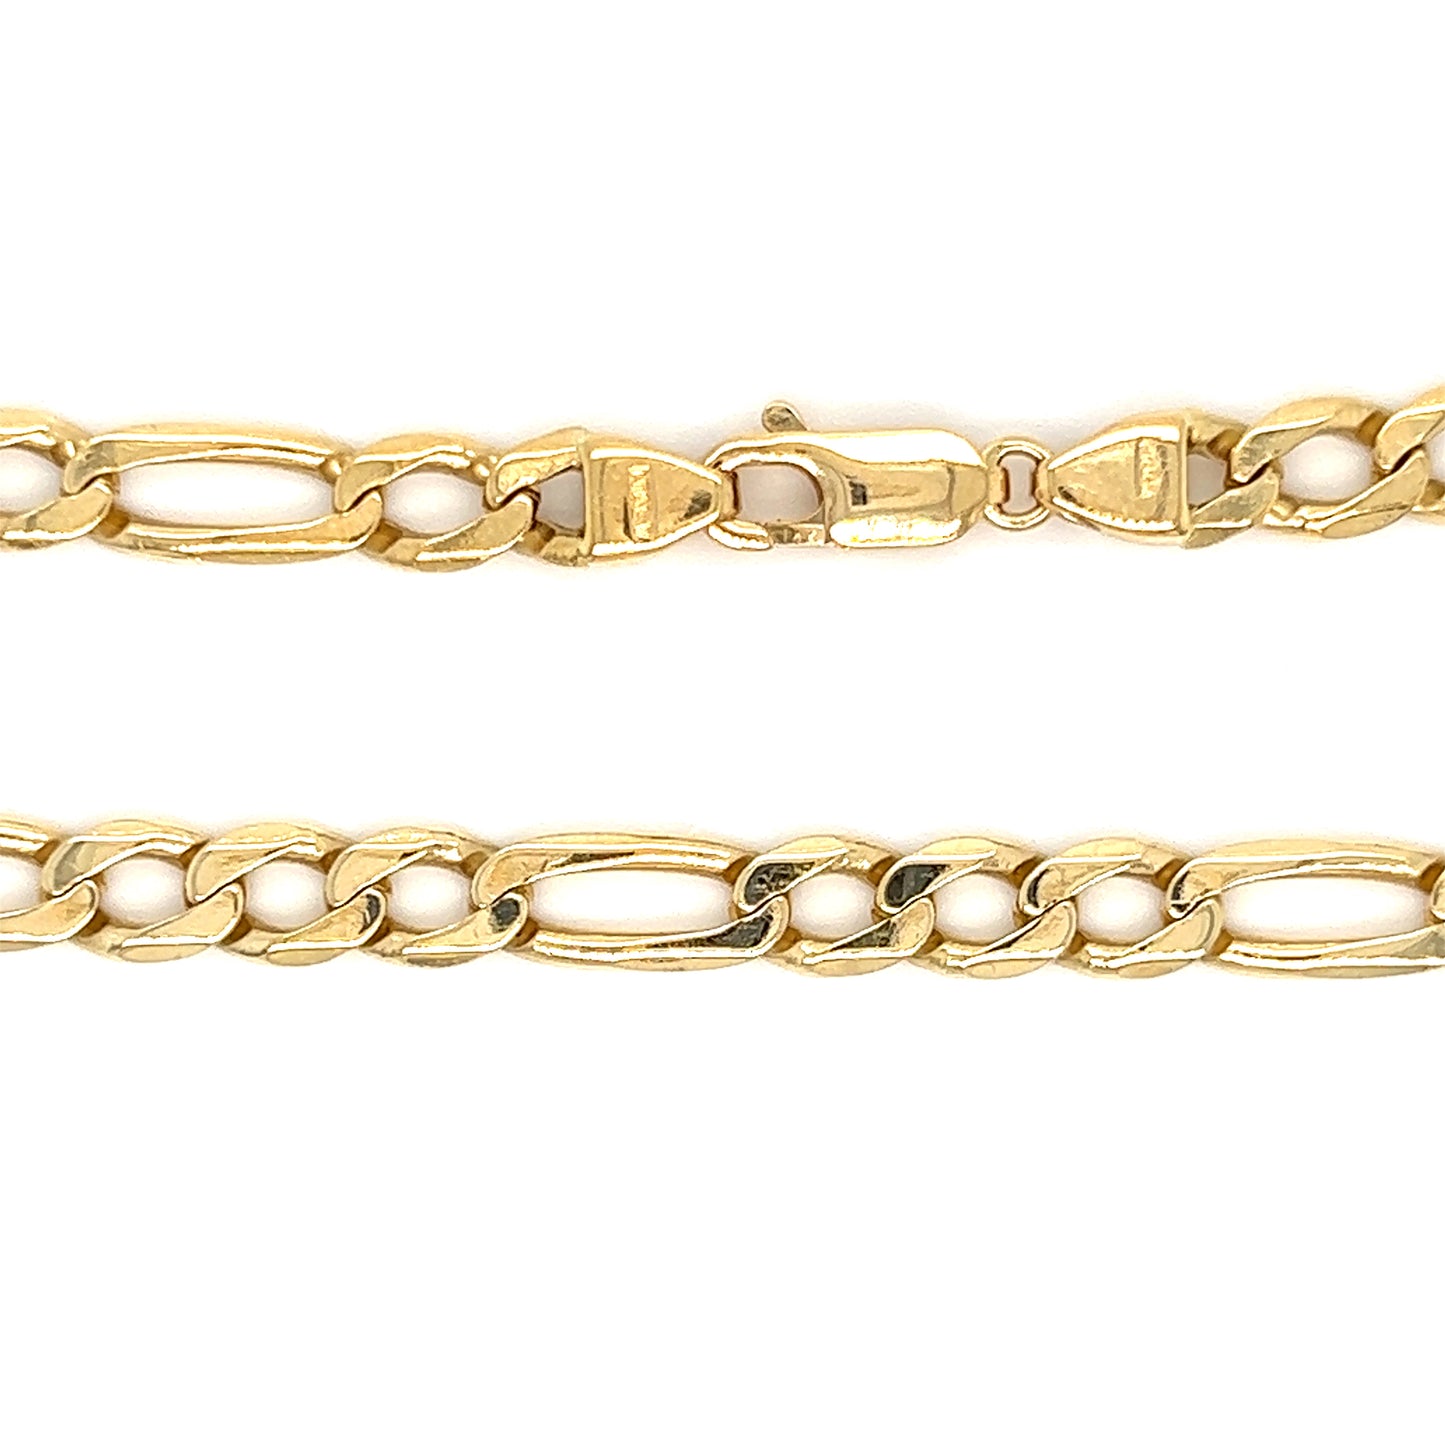 Figaro 5mm Bracelet with 7.5in Length in 14K Yellow Gold Clasp and Links View